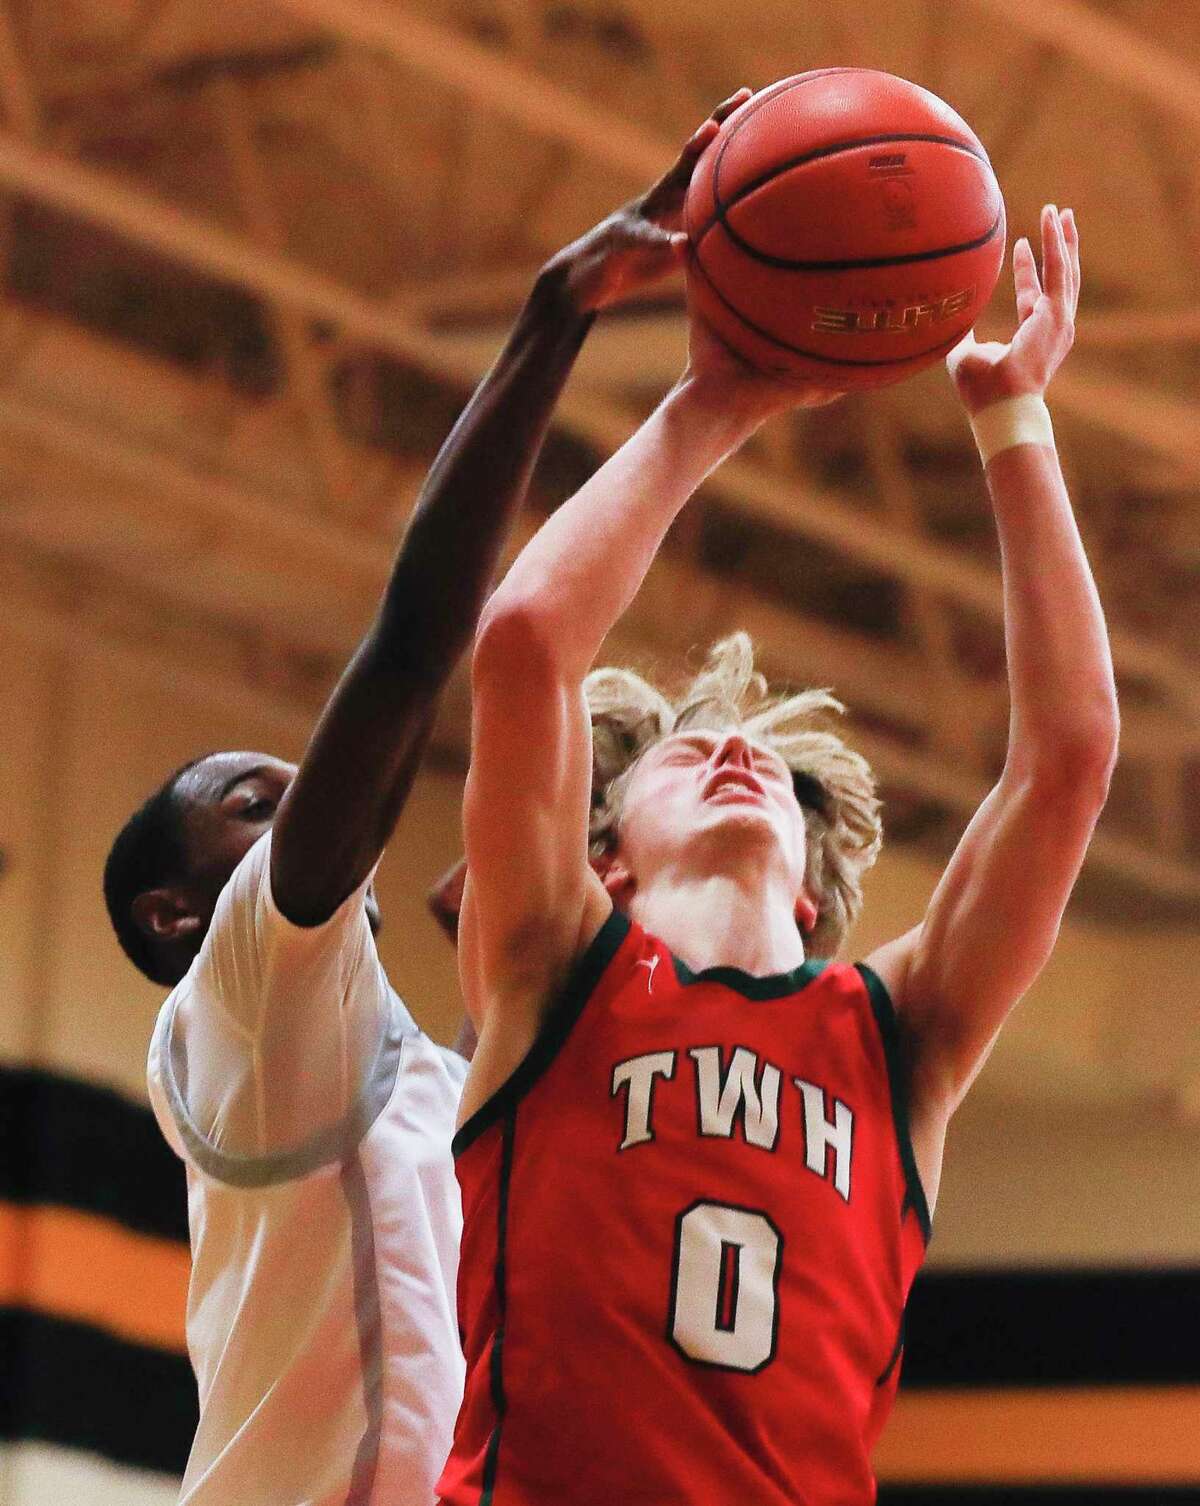 The Woodlands guard Ty Sheldon (0) is fouled during the fourth quarter of a high school basketball game at Klein Oak High School, Wednesday, Dec. 15, 2021, in Spring.